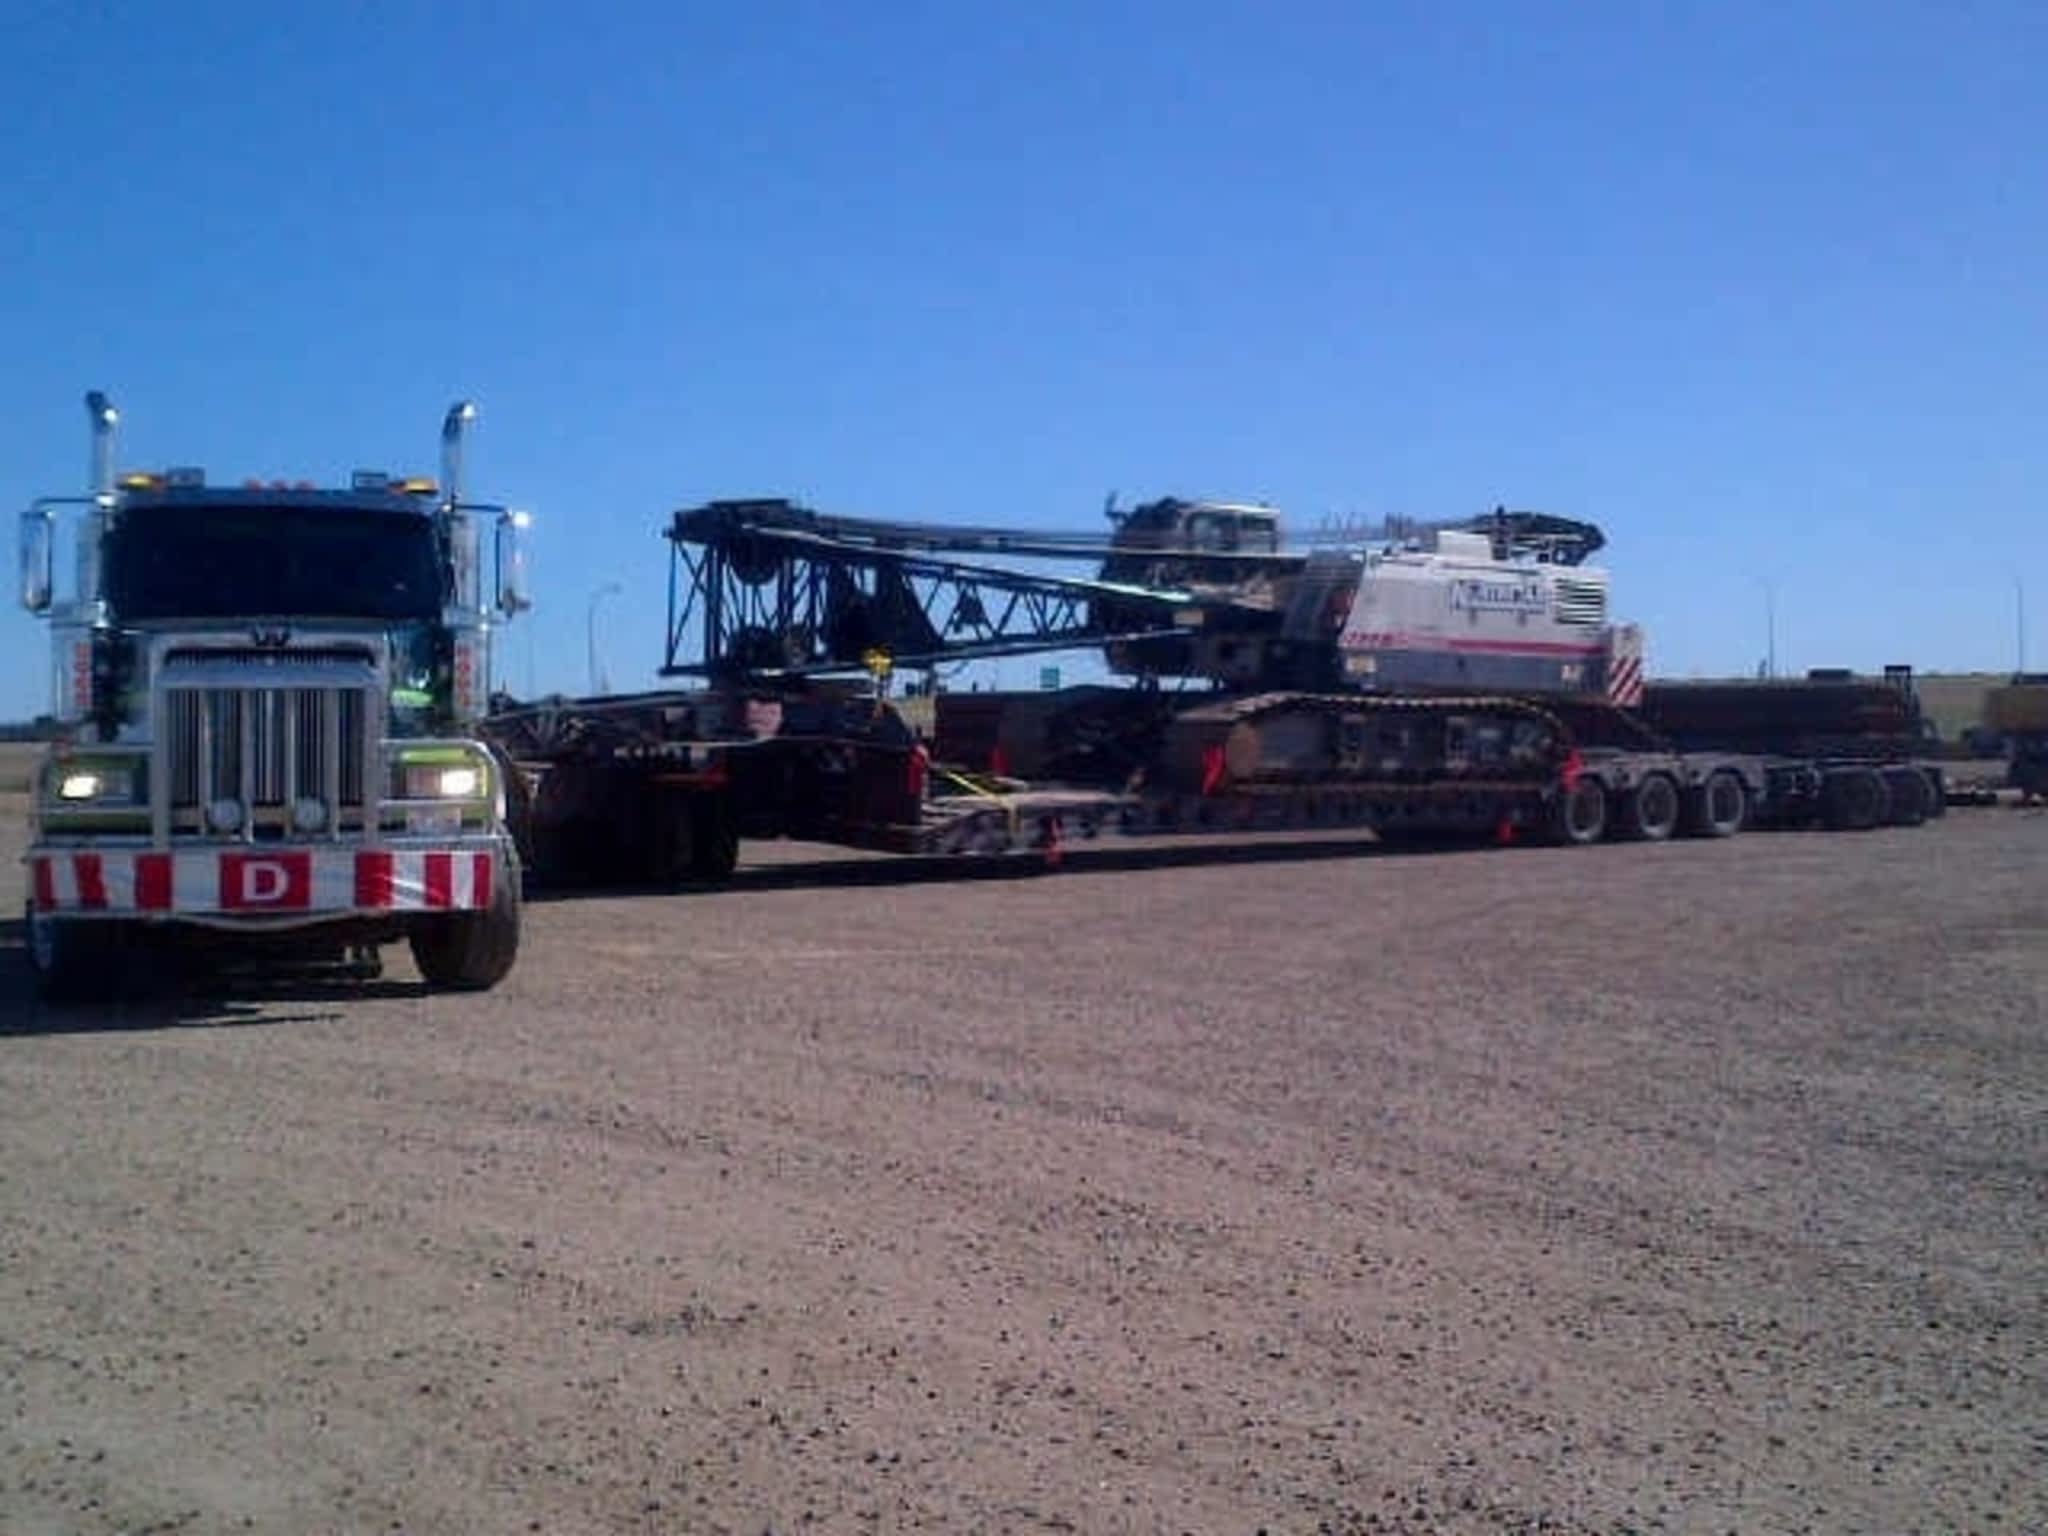 photo Mayne Transport and Recovery Services Ltd